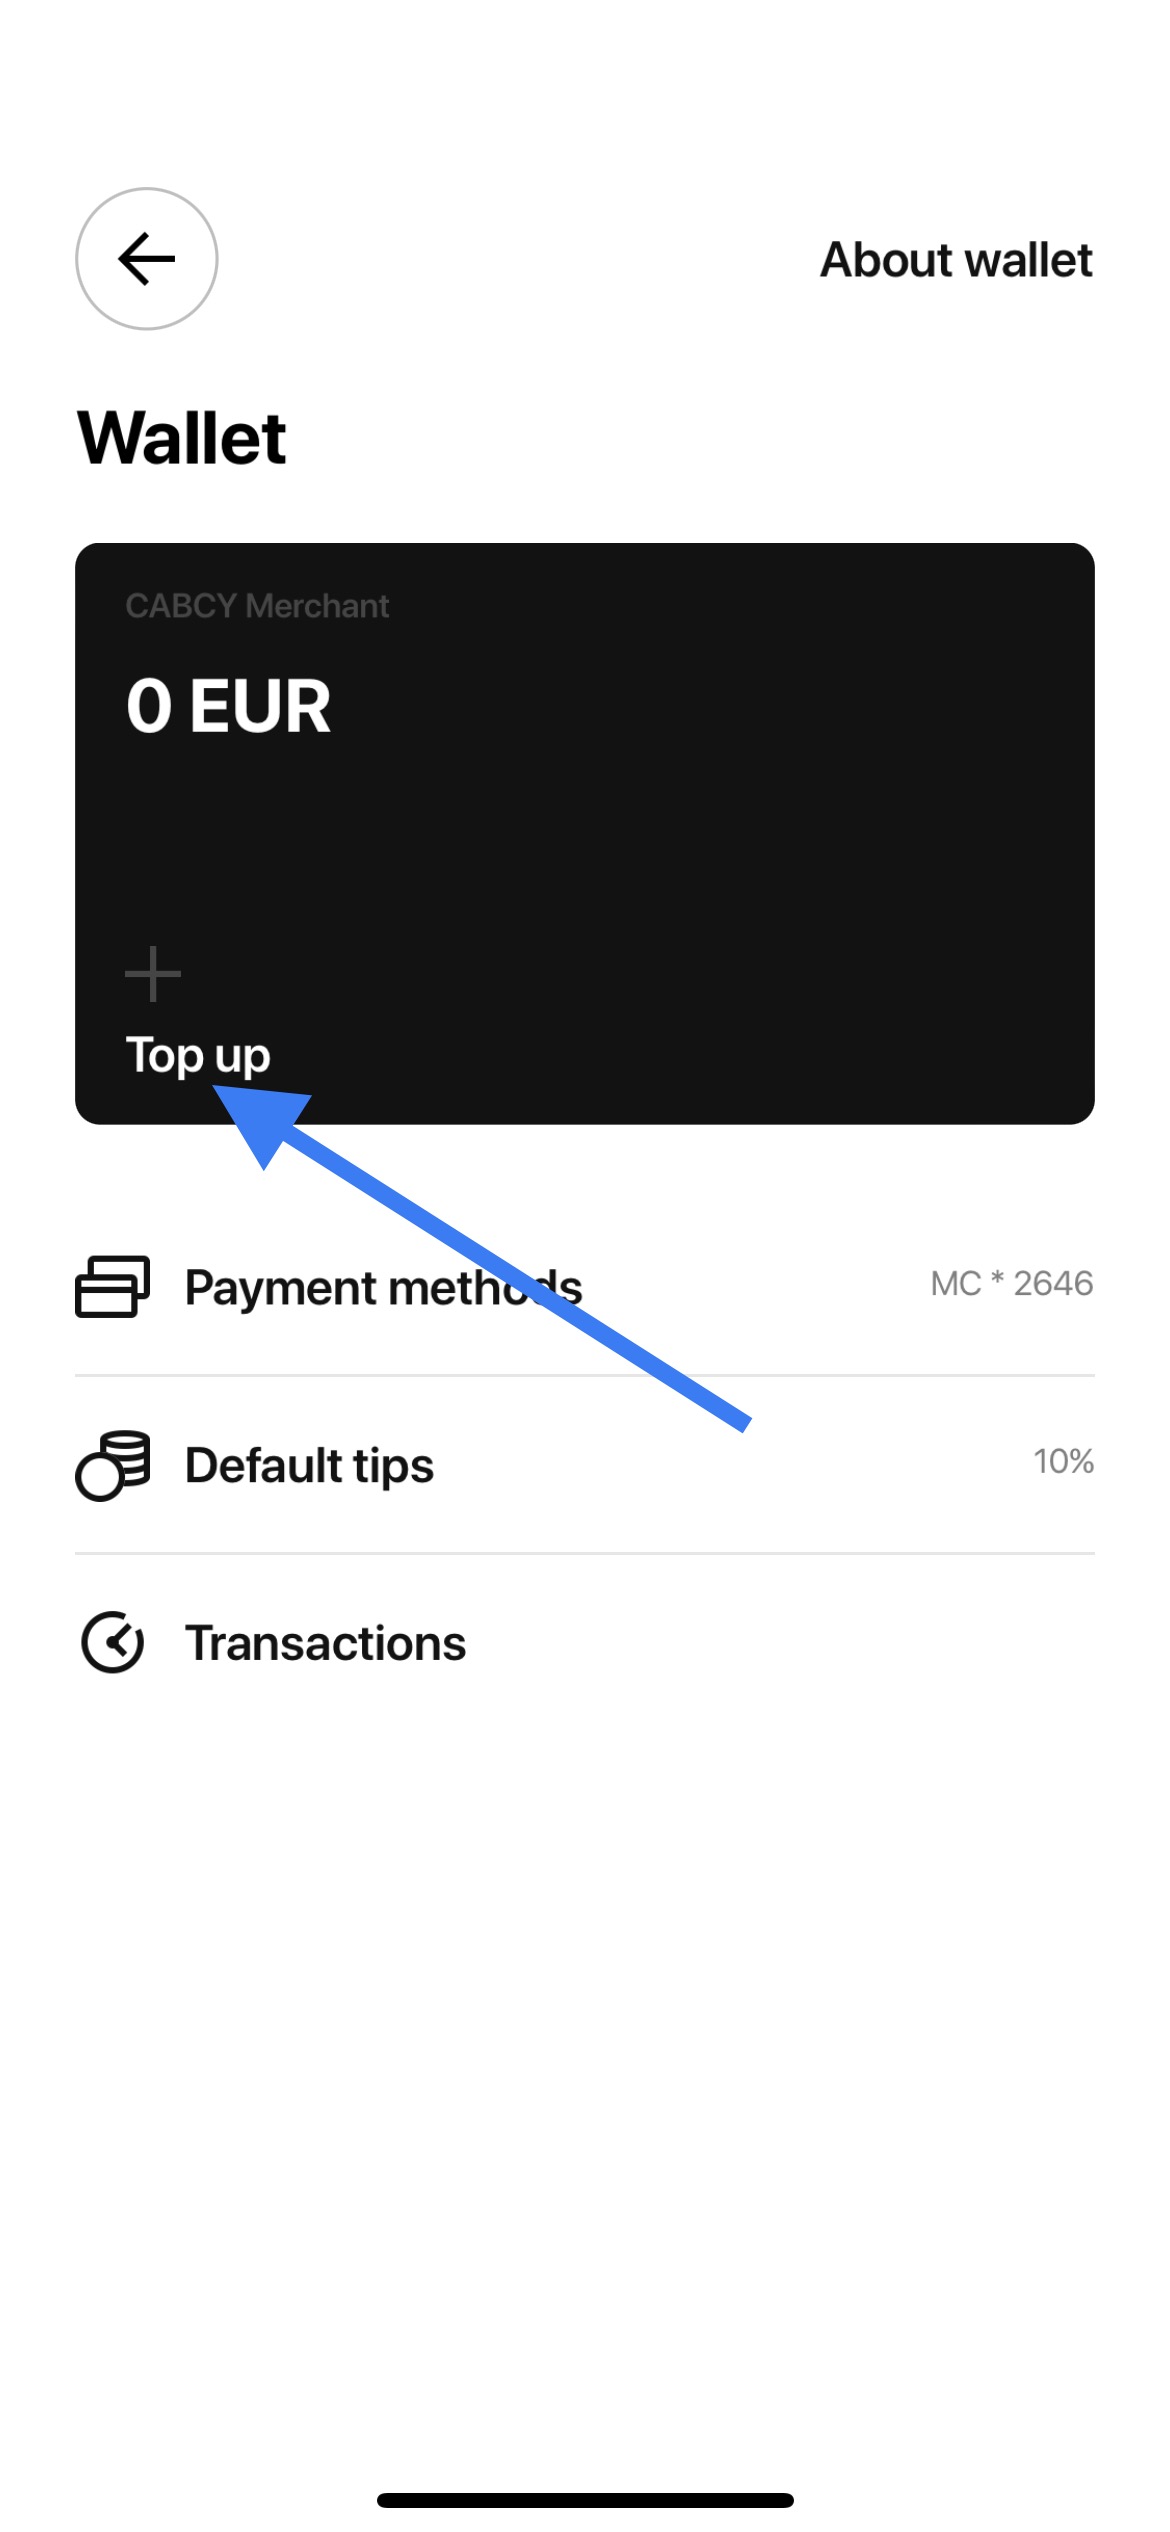 How to top up wallet in cabcy app